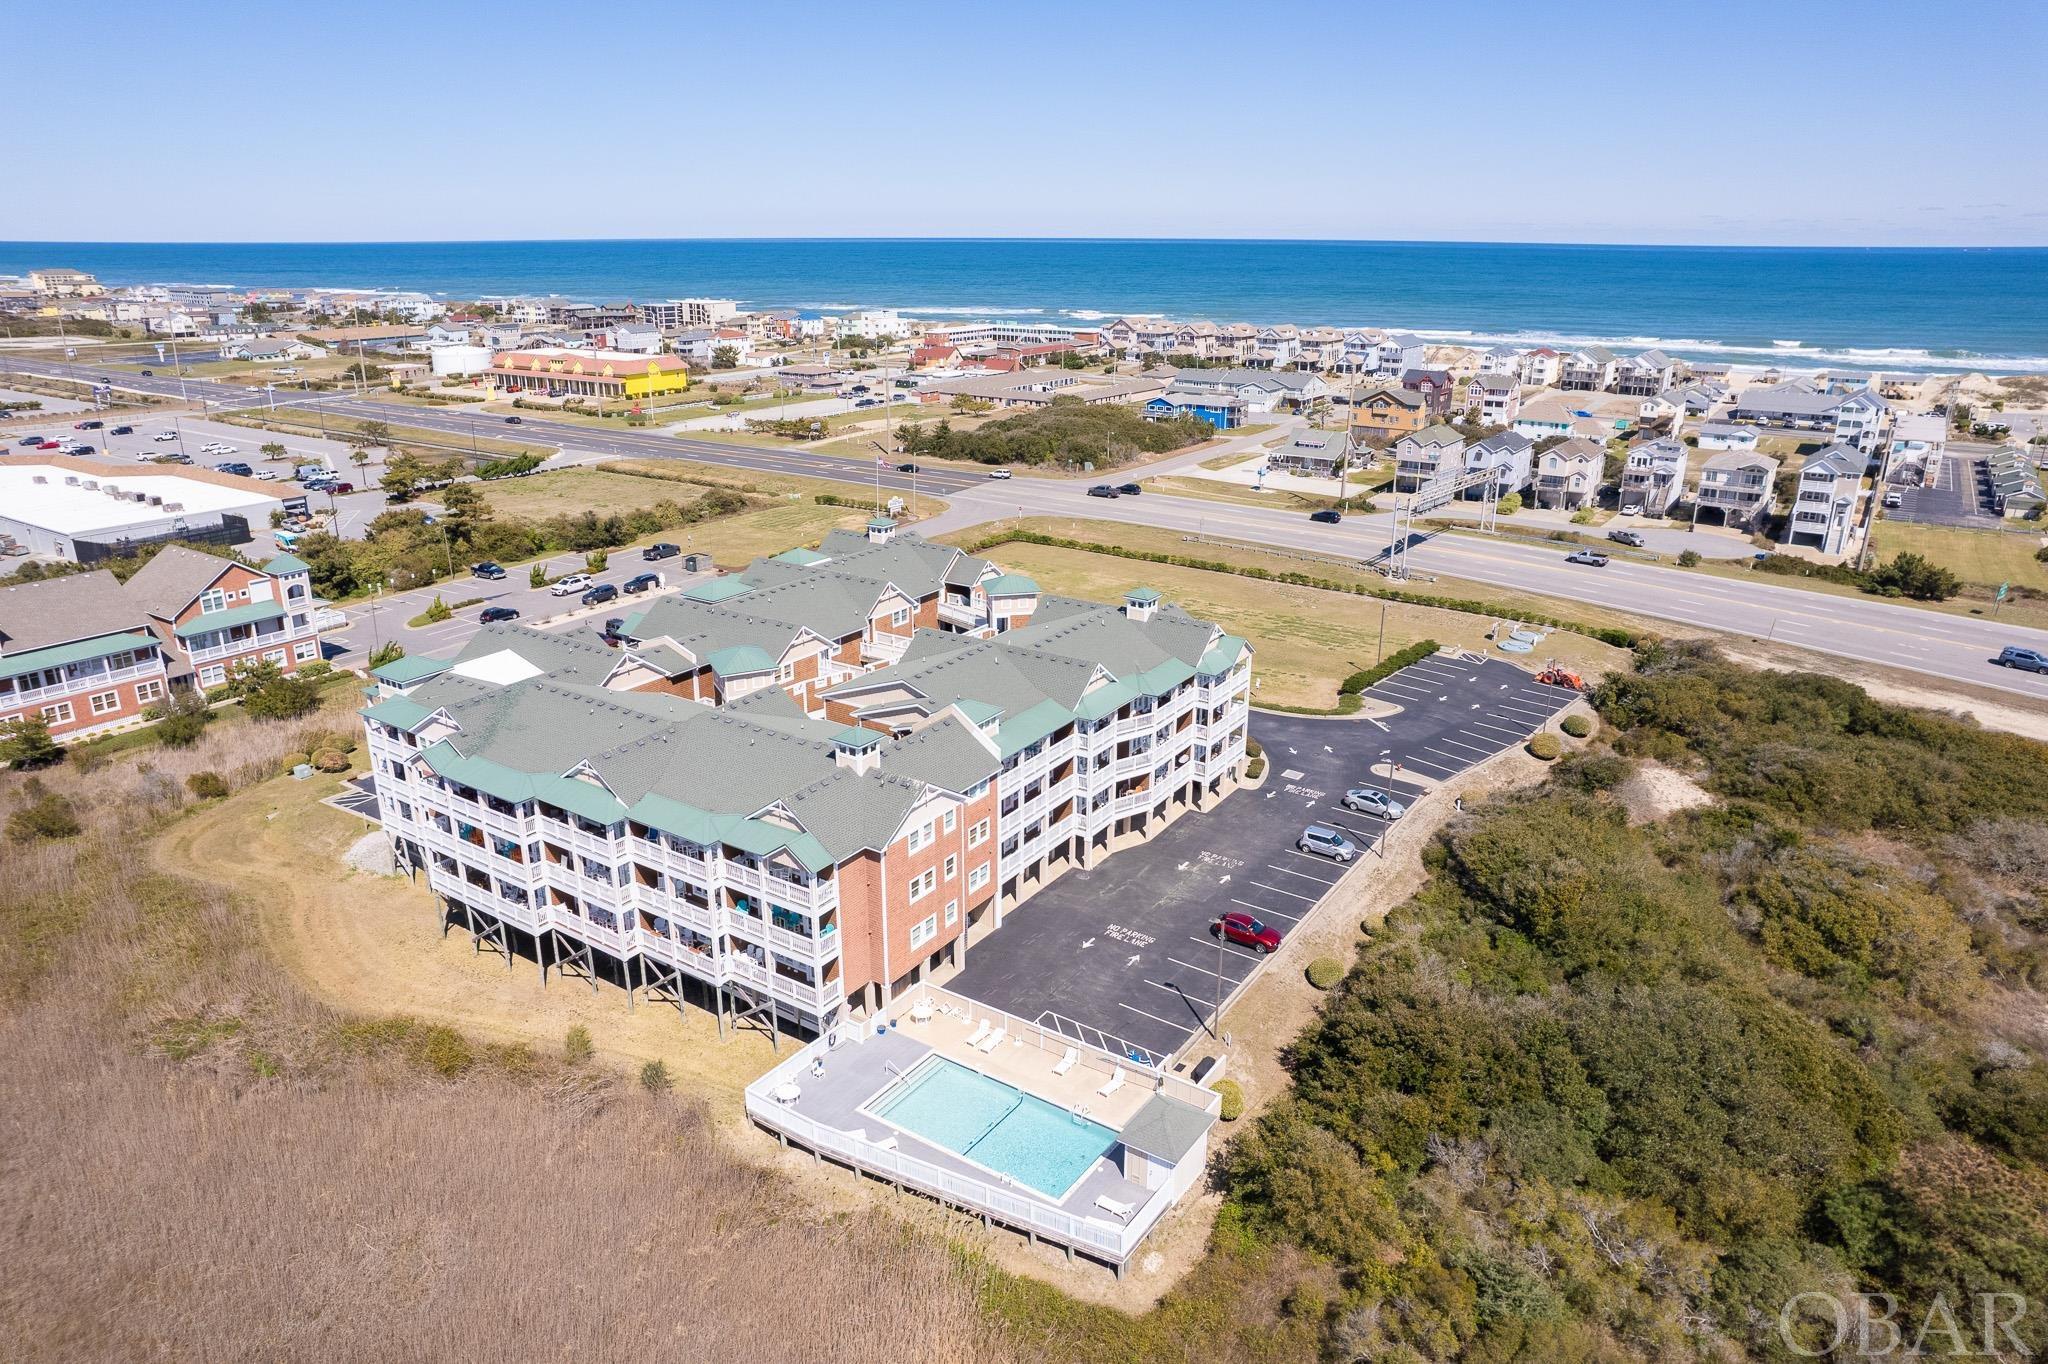 107 Gray Eagle Street, Nags Head, NC 27959, 2 Bedrooms Bedrooms, ,2 BathroomsBathrooms,Residential,For sale,Gray Eagle Street,125154